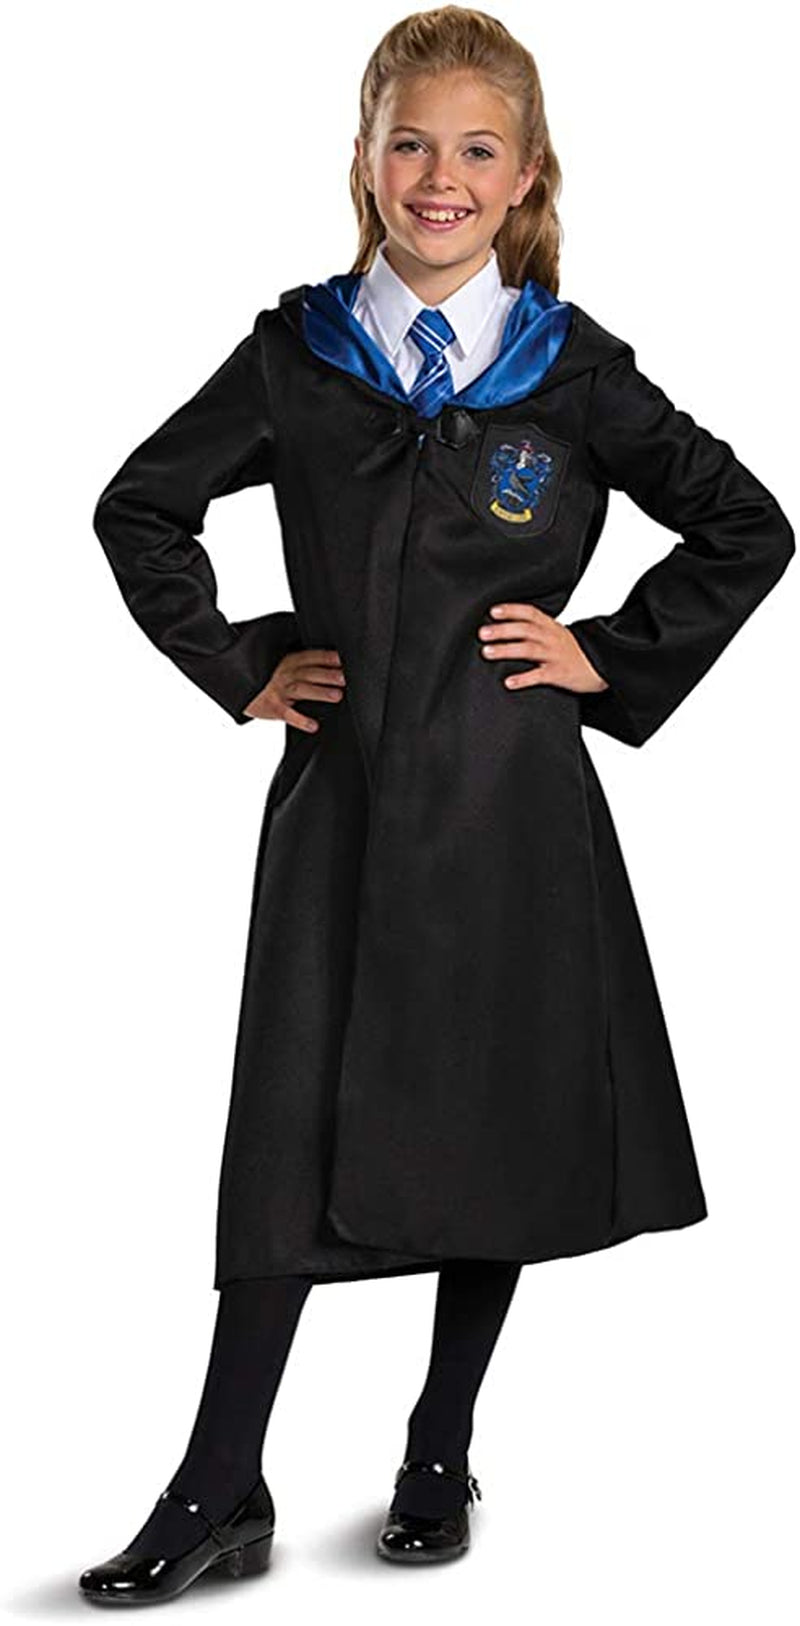 Harry Potter Robe, Official Hogwarts Wizarding World Costume Robes, Classic Kids Size Dress up Accessory  Disguise Ravenclaw Medium (7-8) 